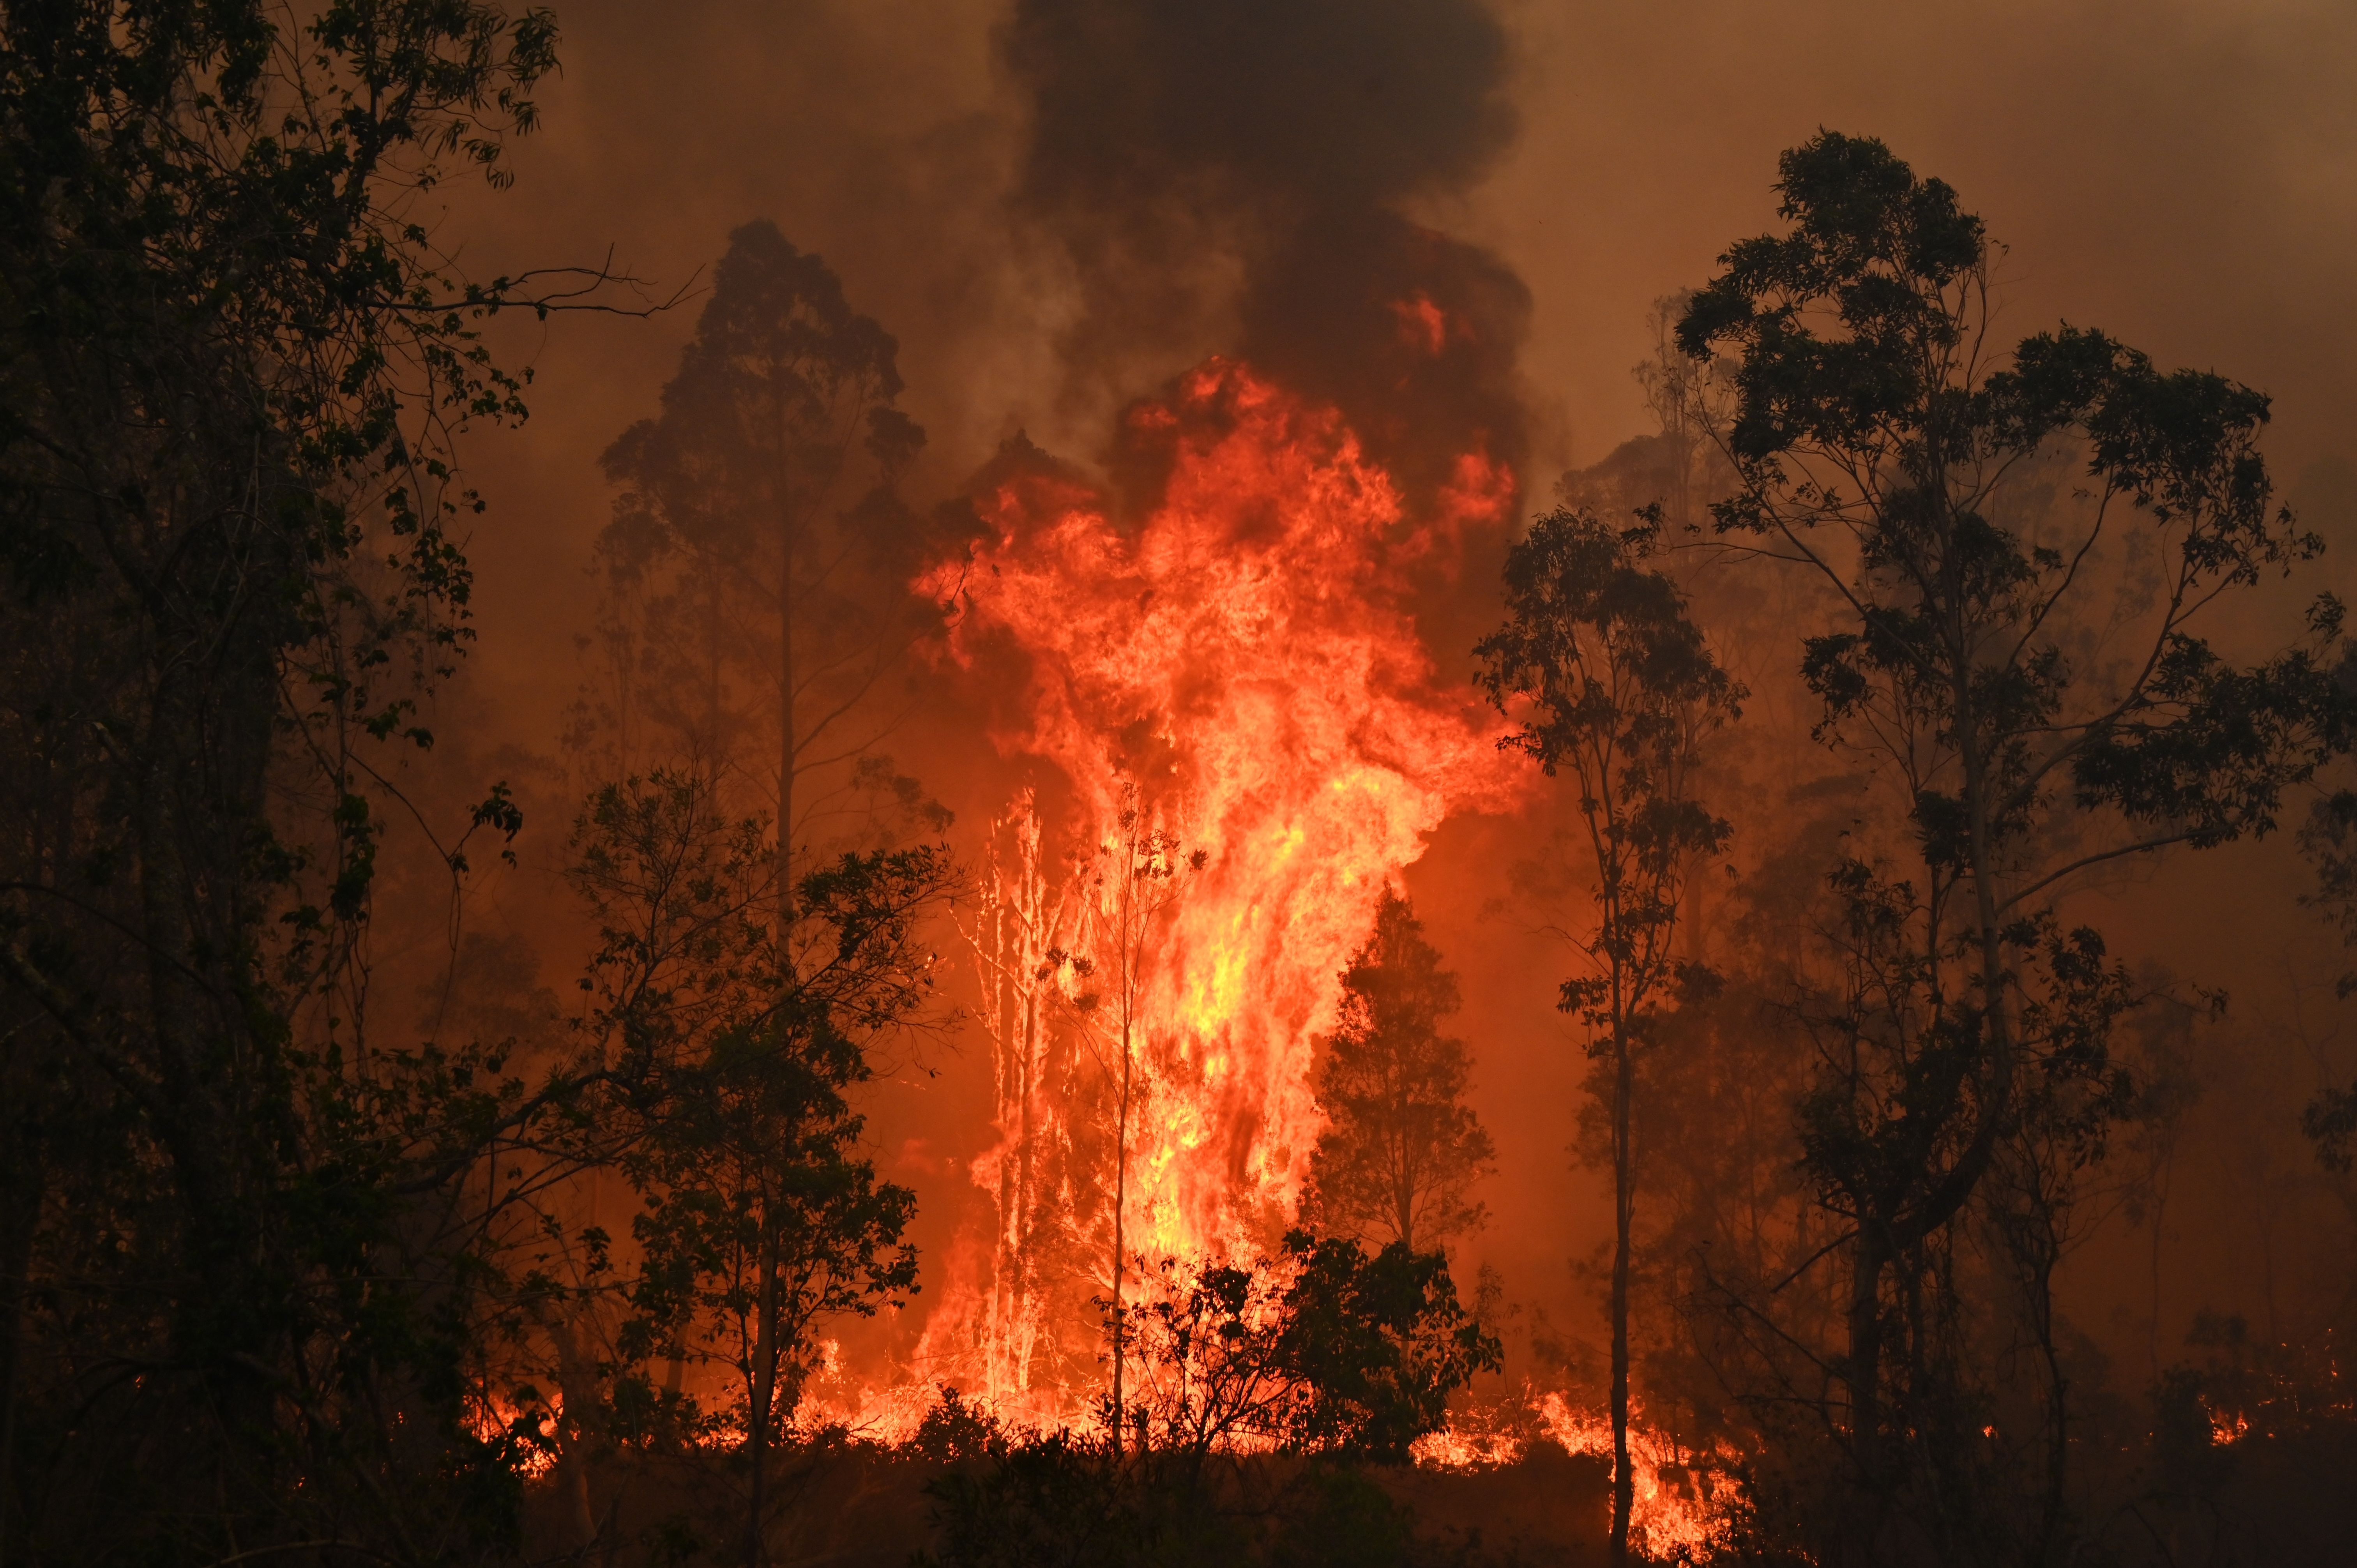  A fire rages in Bobin, 350 kilometers (217 miles) north of Sydney, on November 9.